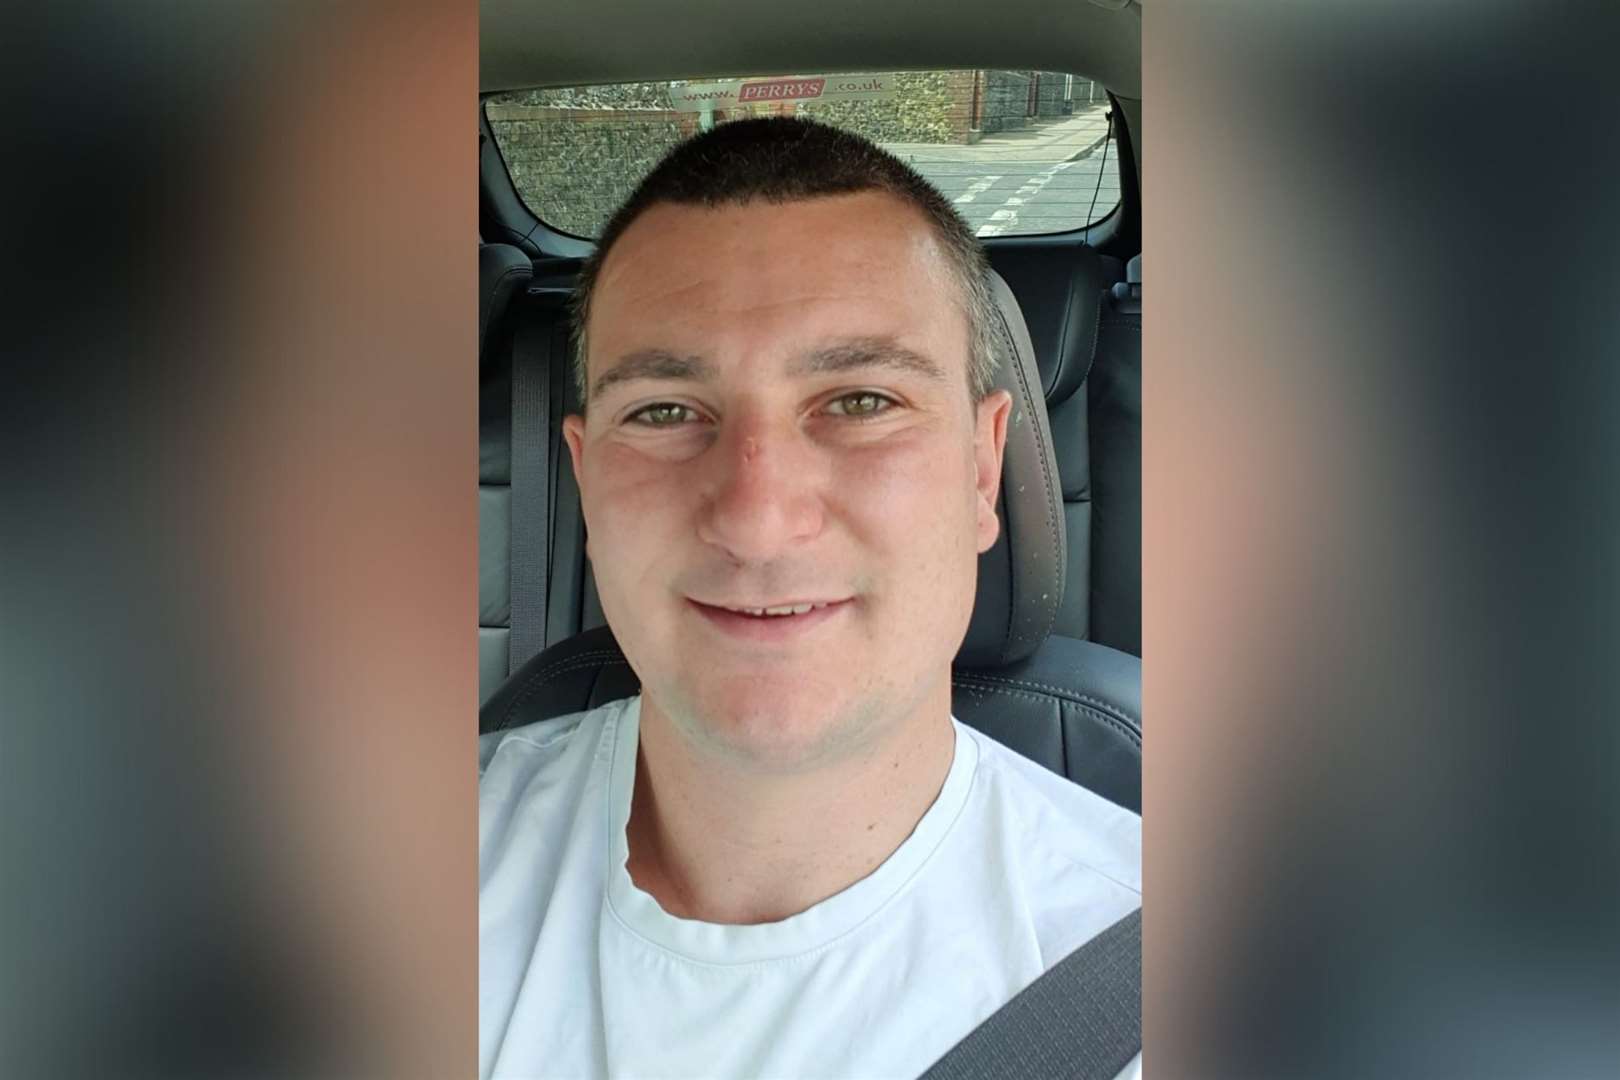 Railway worker and dad Phil Stovell, 32, has been named as the victim who died in hospital after being injured in a hit-and-run in Garlinge, Margate. Picture: Phil Stovell